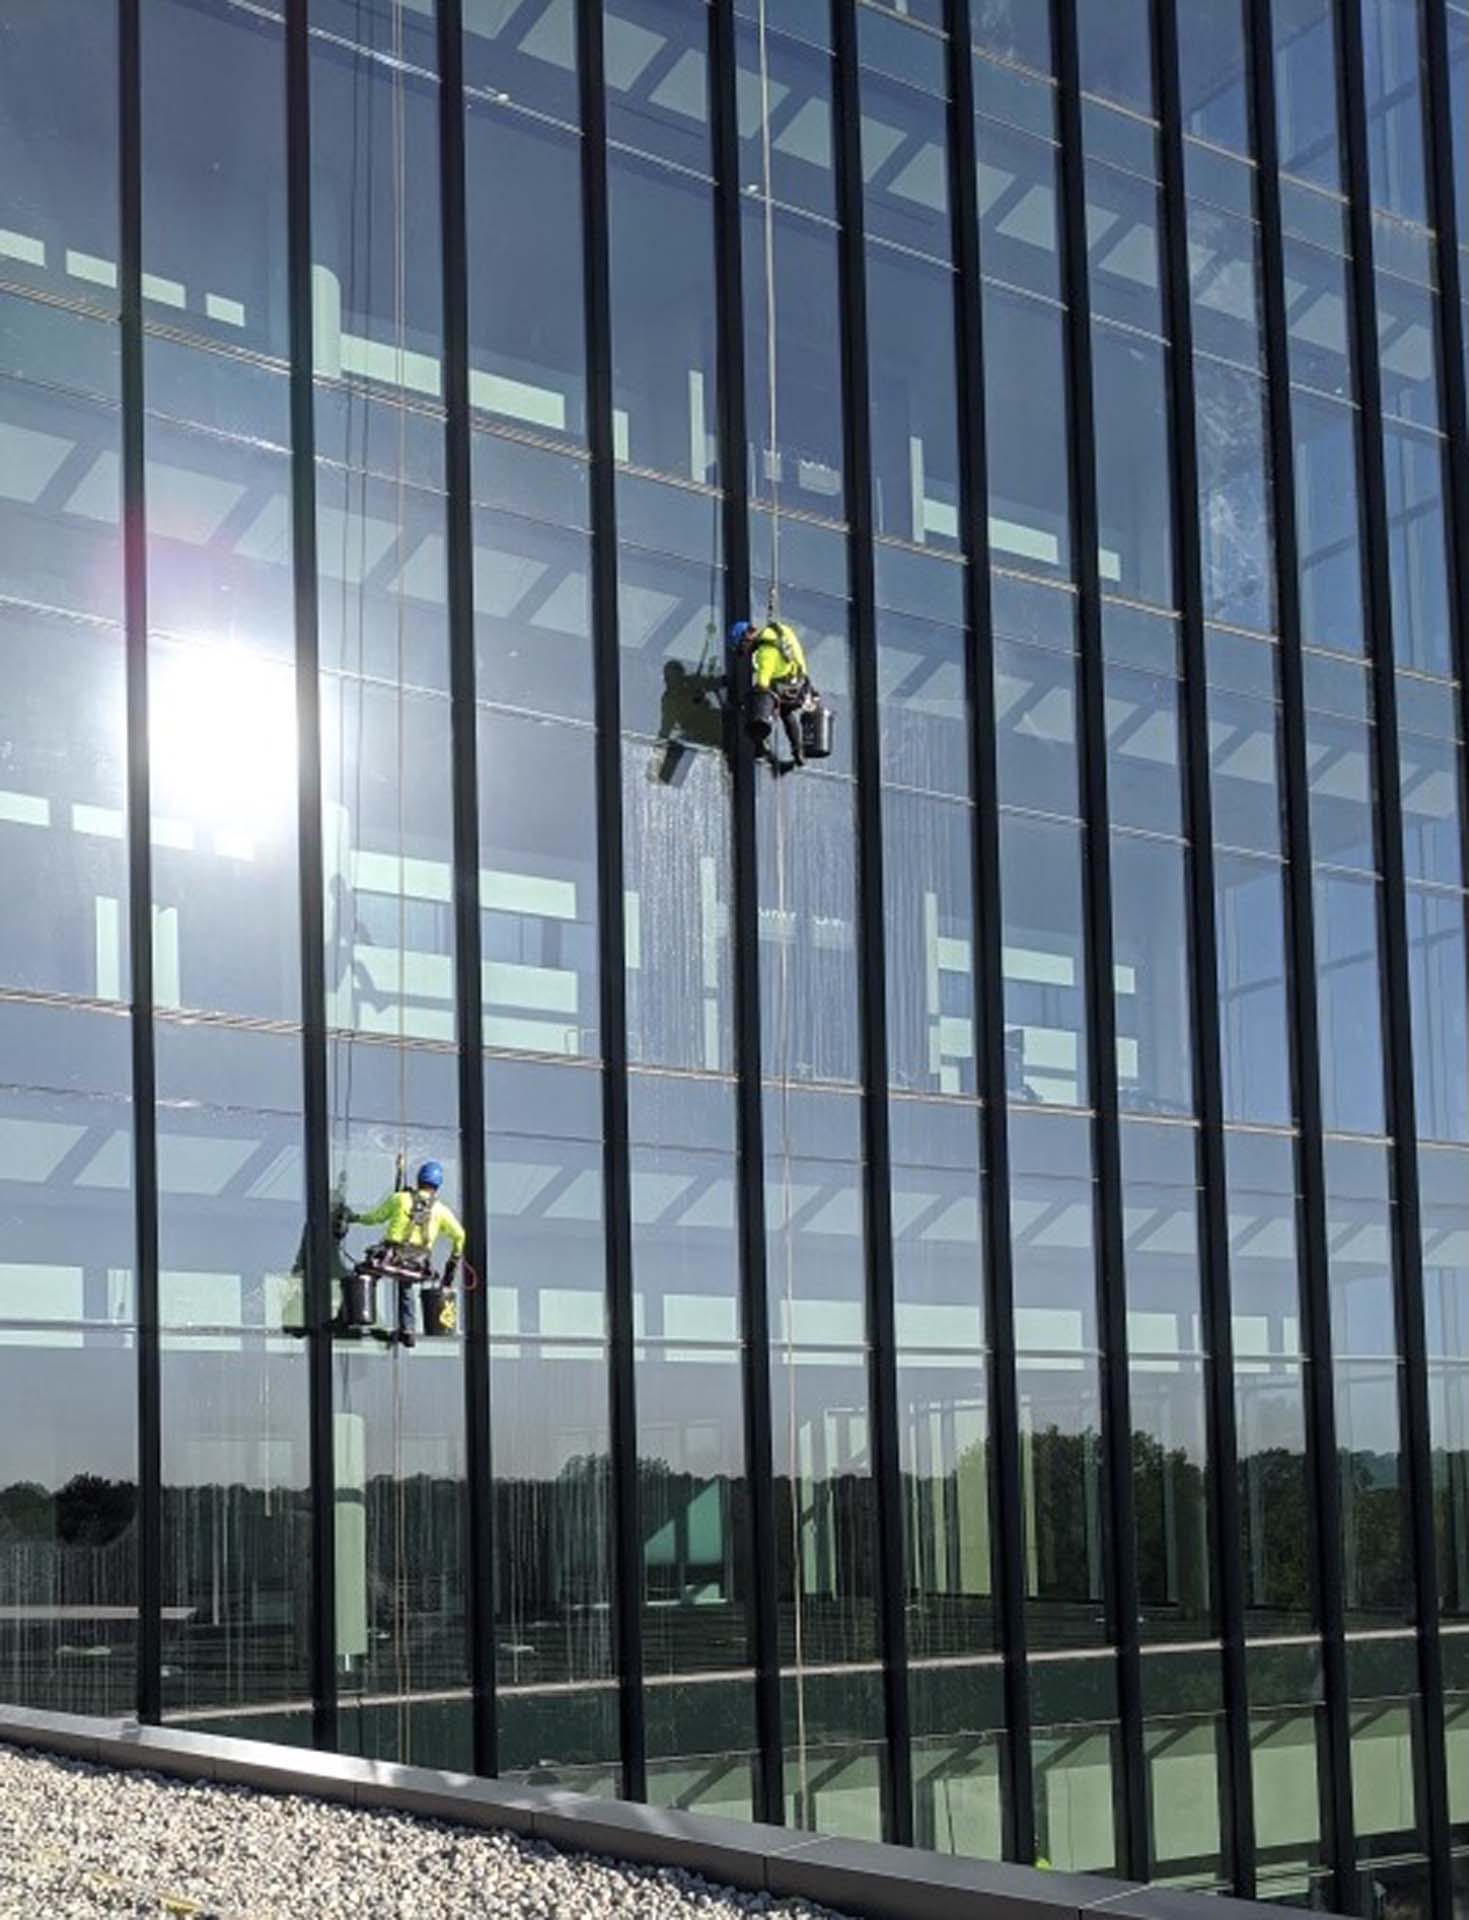 Washing Windows on Skyscrapers: The Daring Job of Empire Window Cleaning